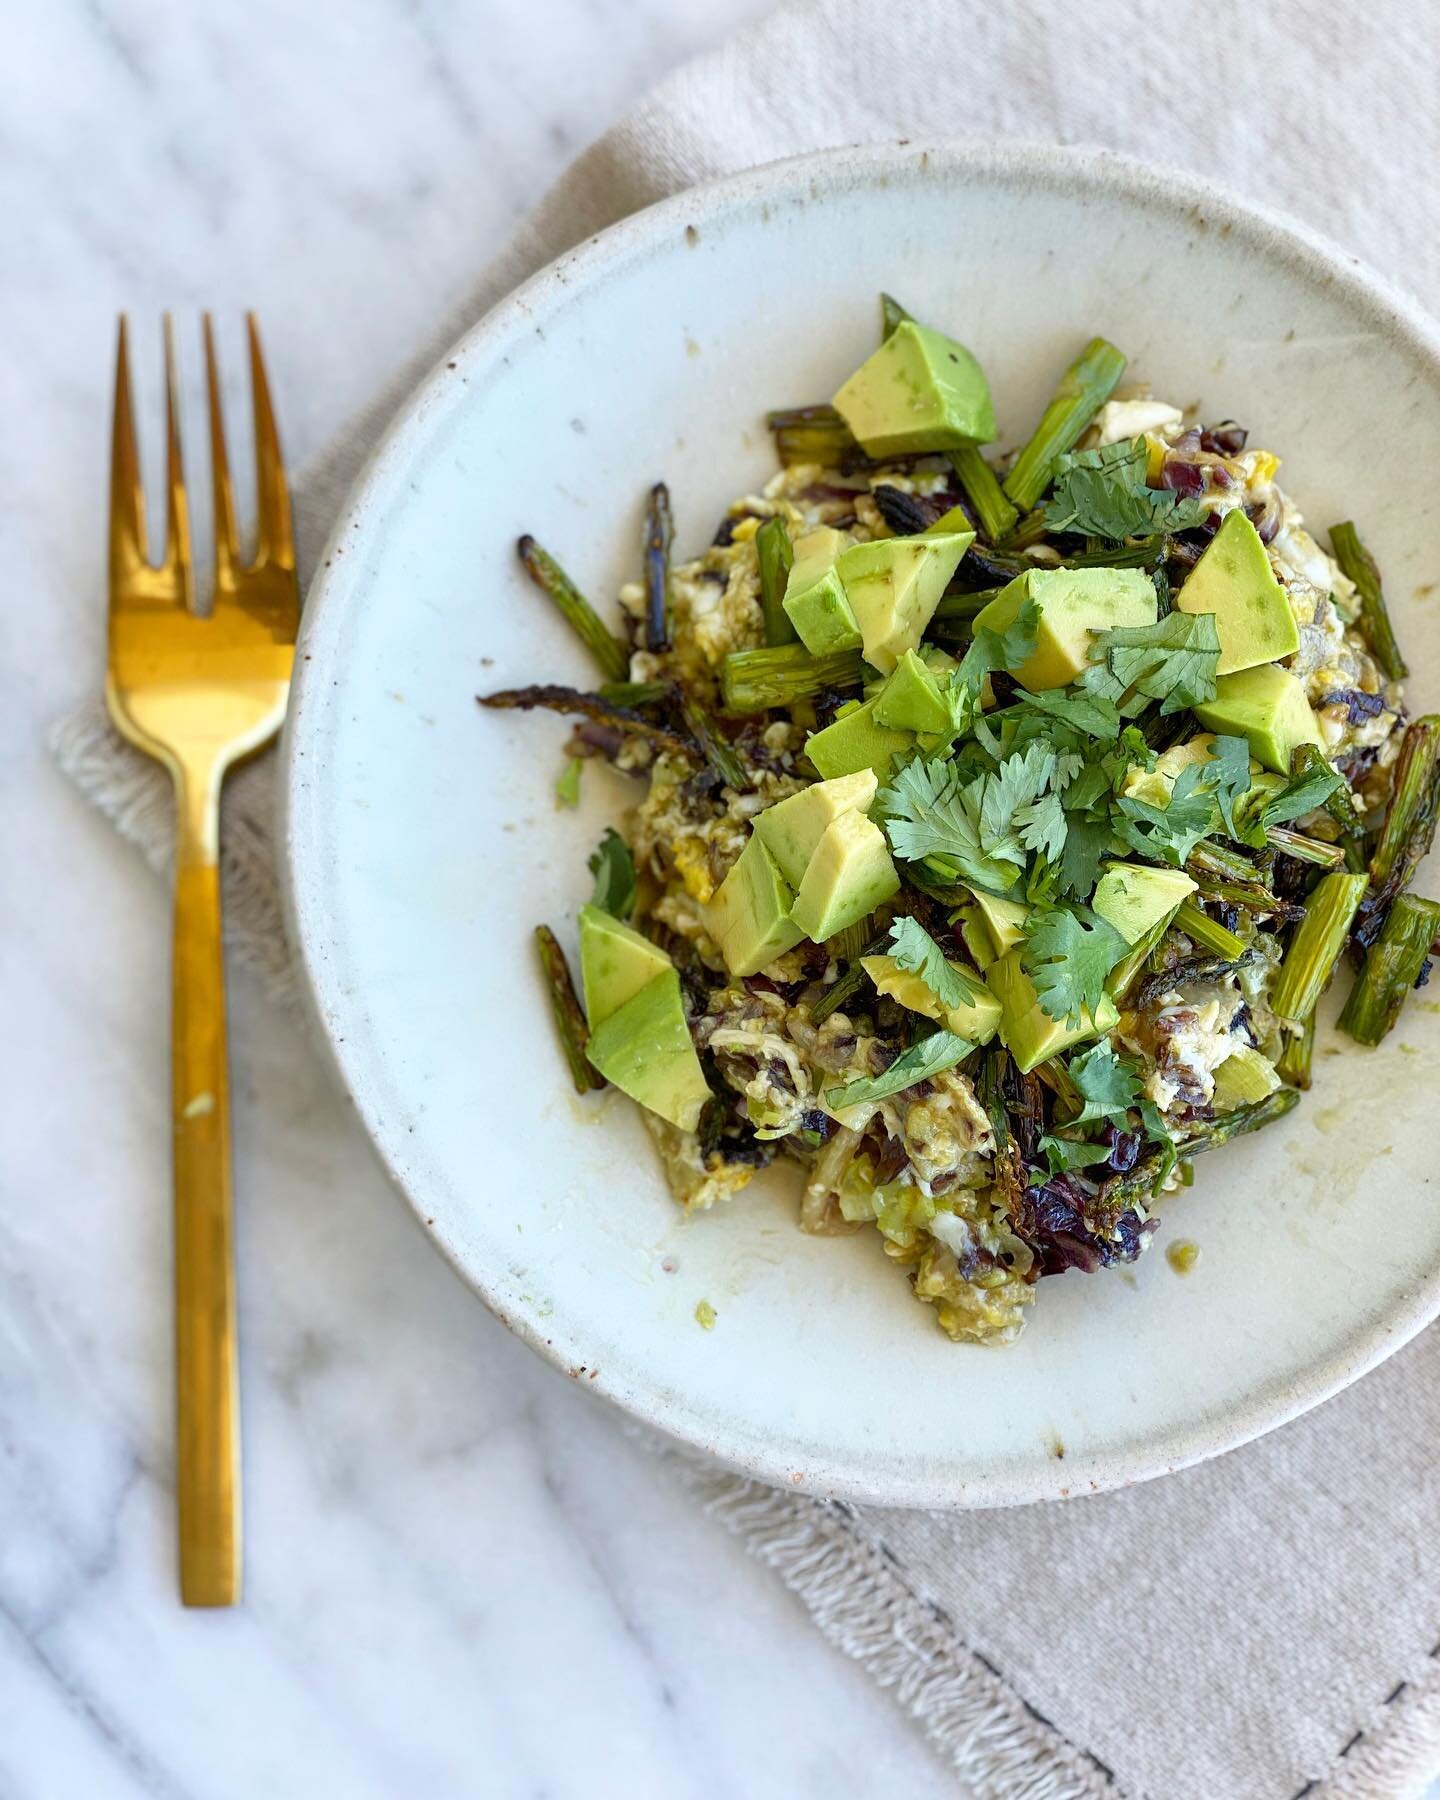 Breakfast for late lunch. Olive oil scrambled eggs with spring onion and radicchio, topped with charred broiled salt and pepper asparagus, avocado and cilantro. A masterpiece,  if I may say so. 😜 #eggsofinstagram  #plantforward #grainfree #glutenfre